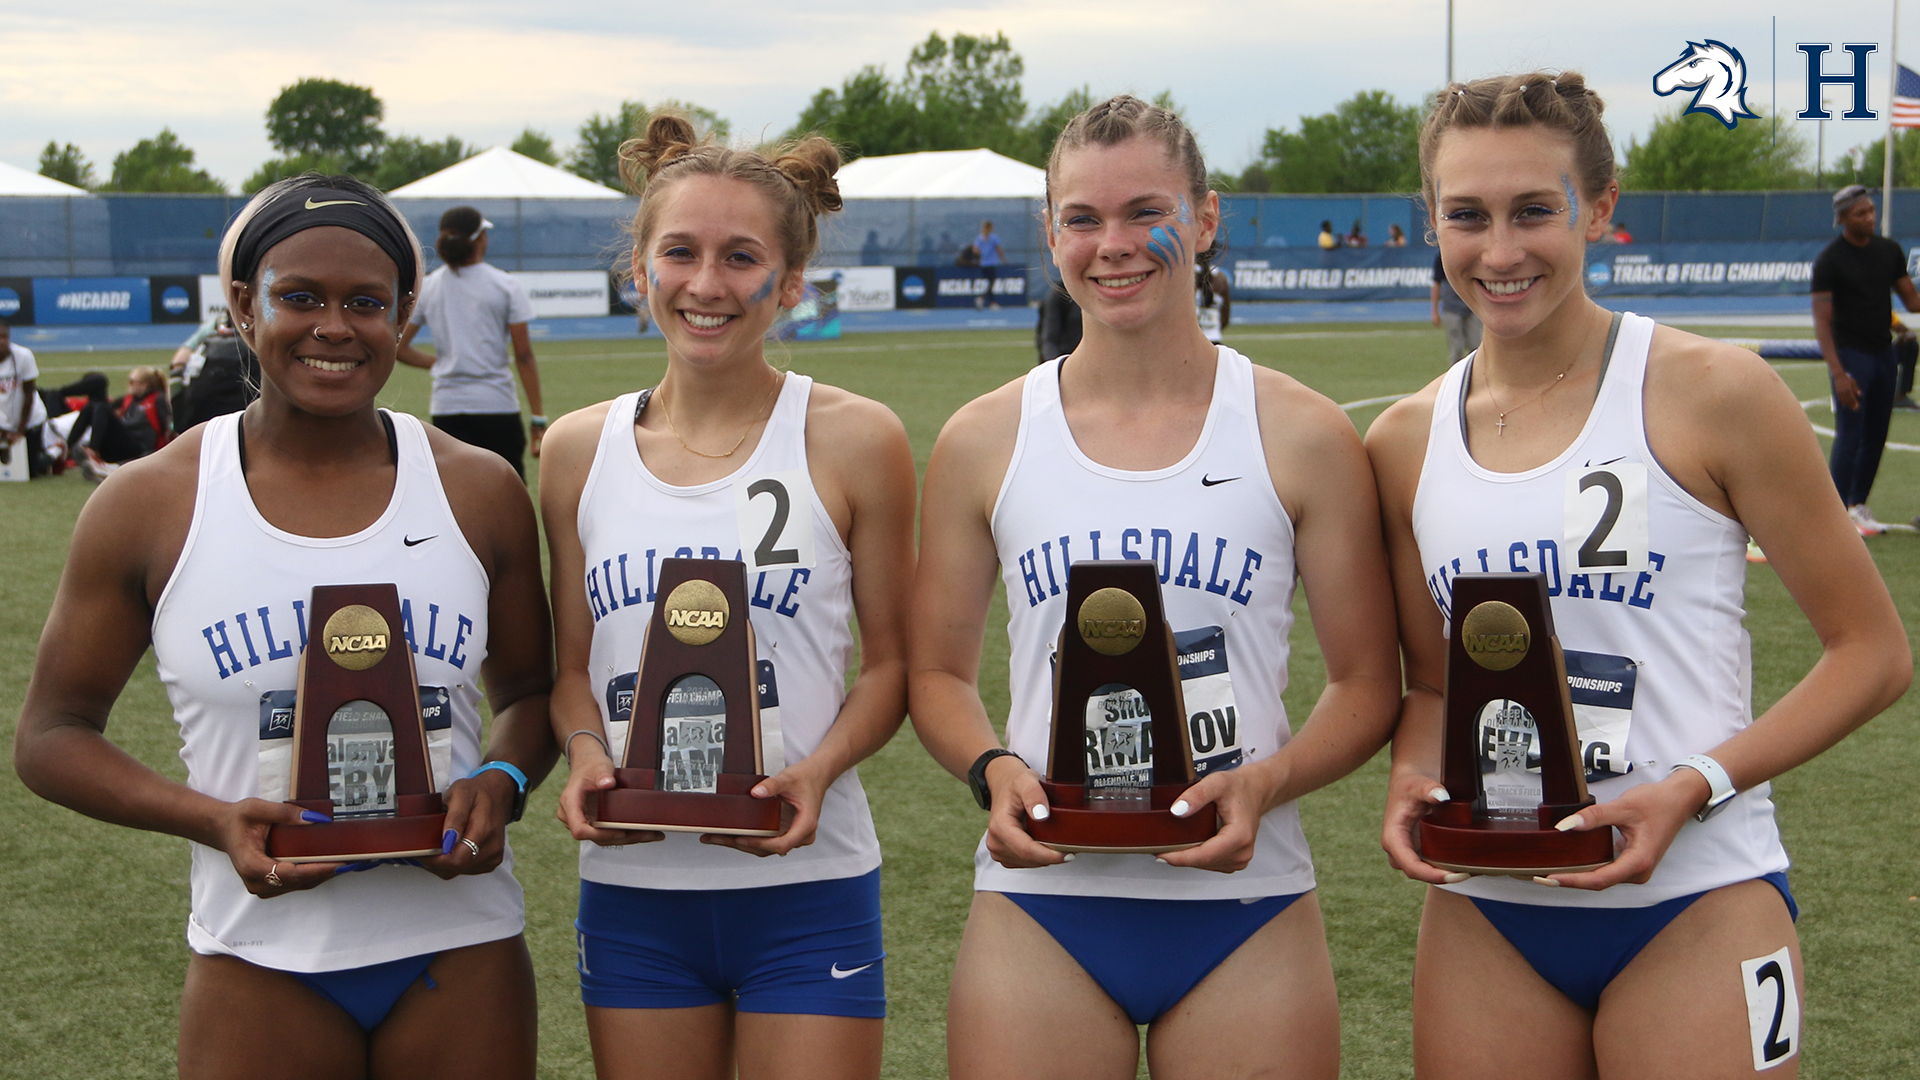 Charger women repeat as All-Americans in 4x400m relay at NCAA DII Outdoor Championships